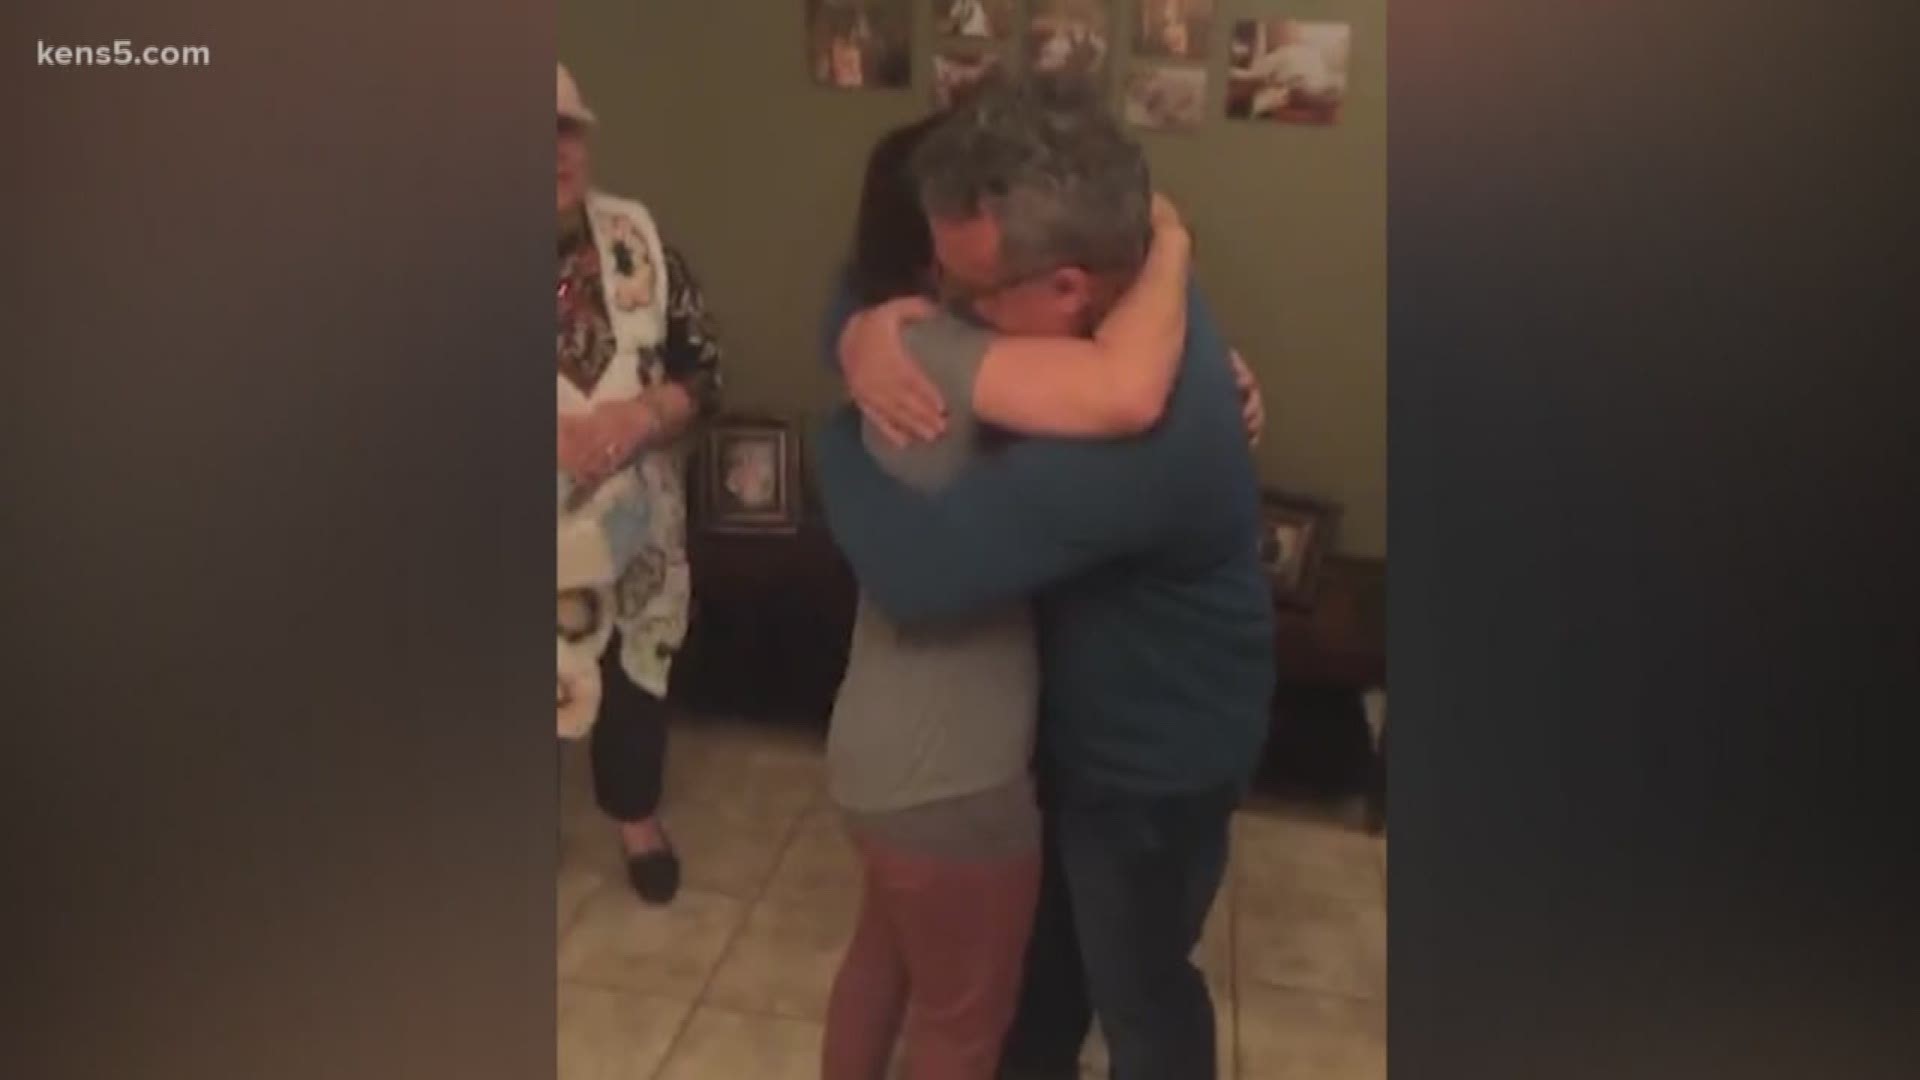 A San Antonio woman meets her biological father for the first time and it is captured on camera. The heart-warming scene came after months of searching, praying, and dead ends. Digital journalist Nia Wesley captured the emotional moment.